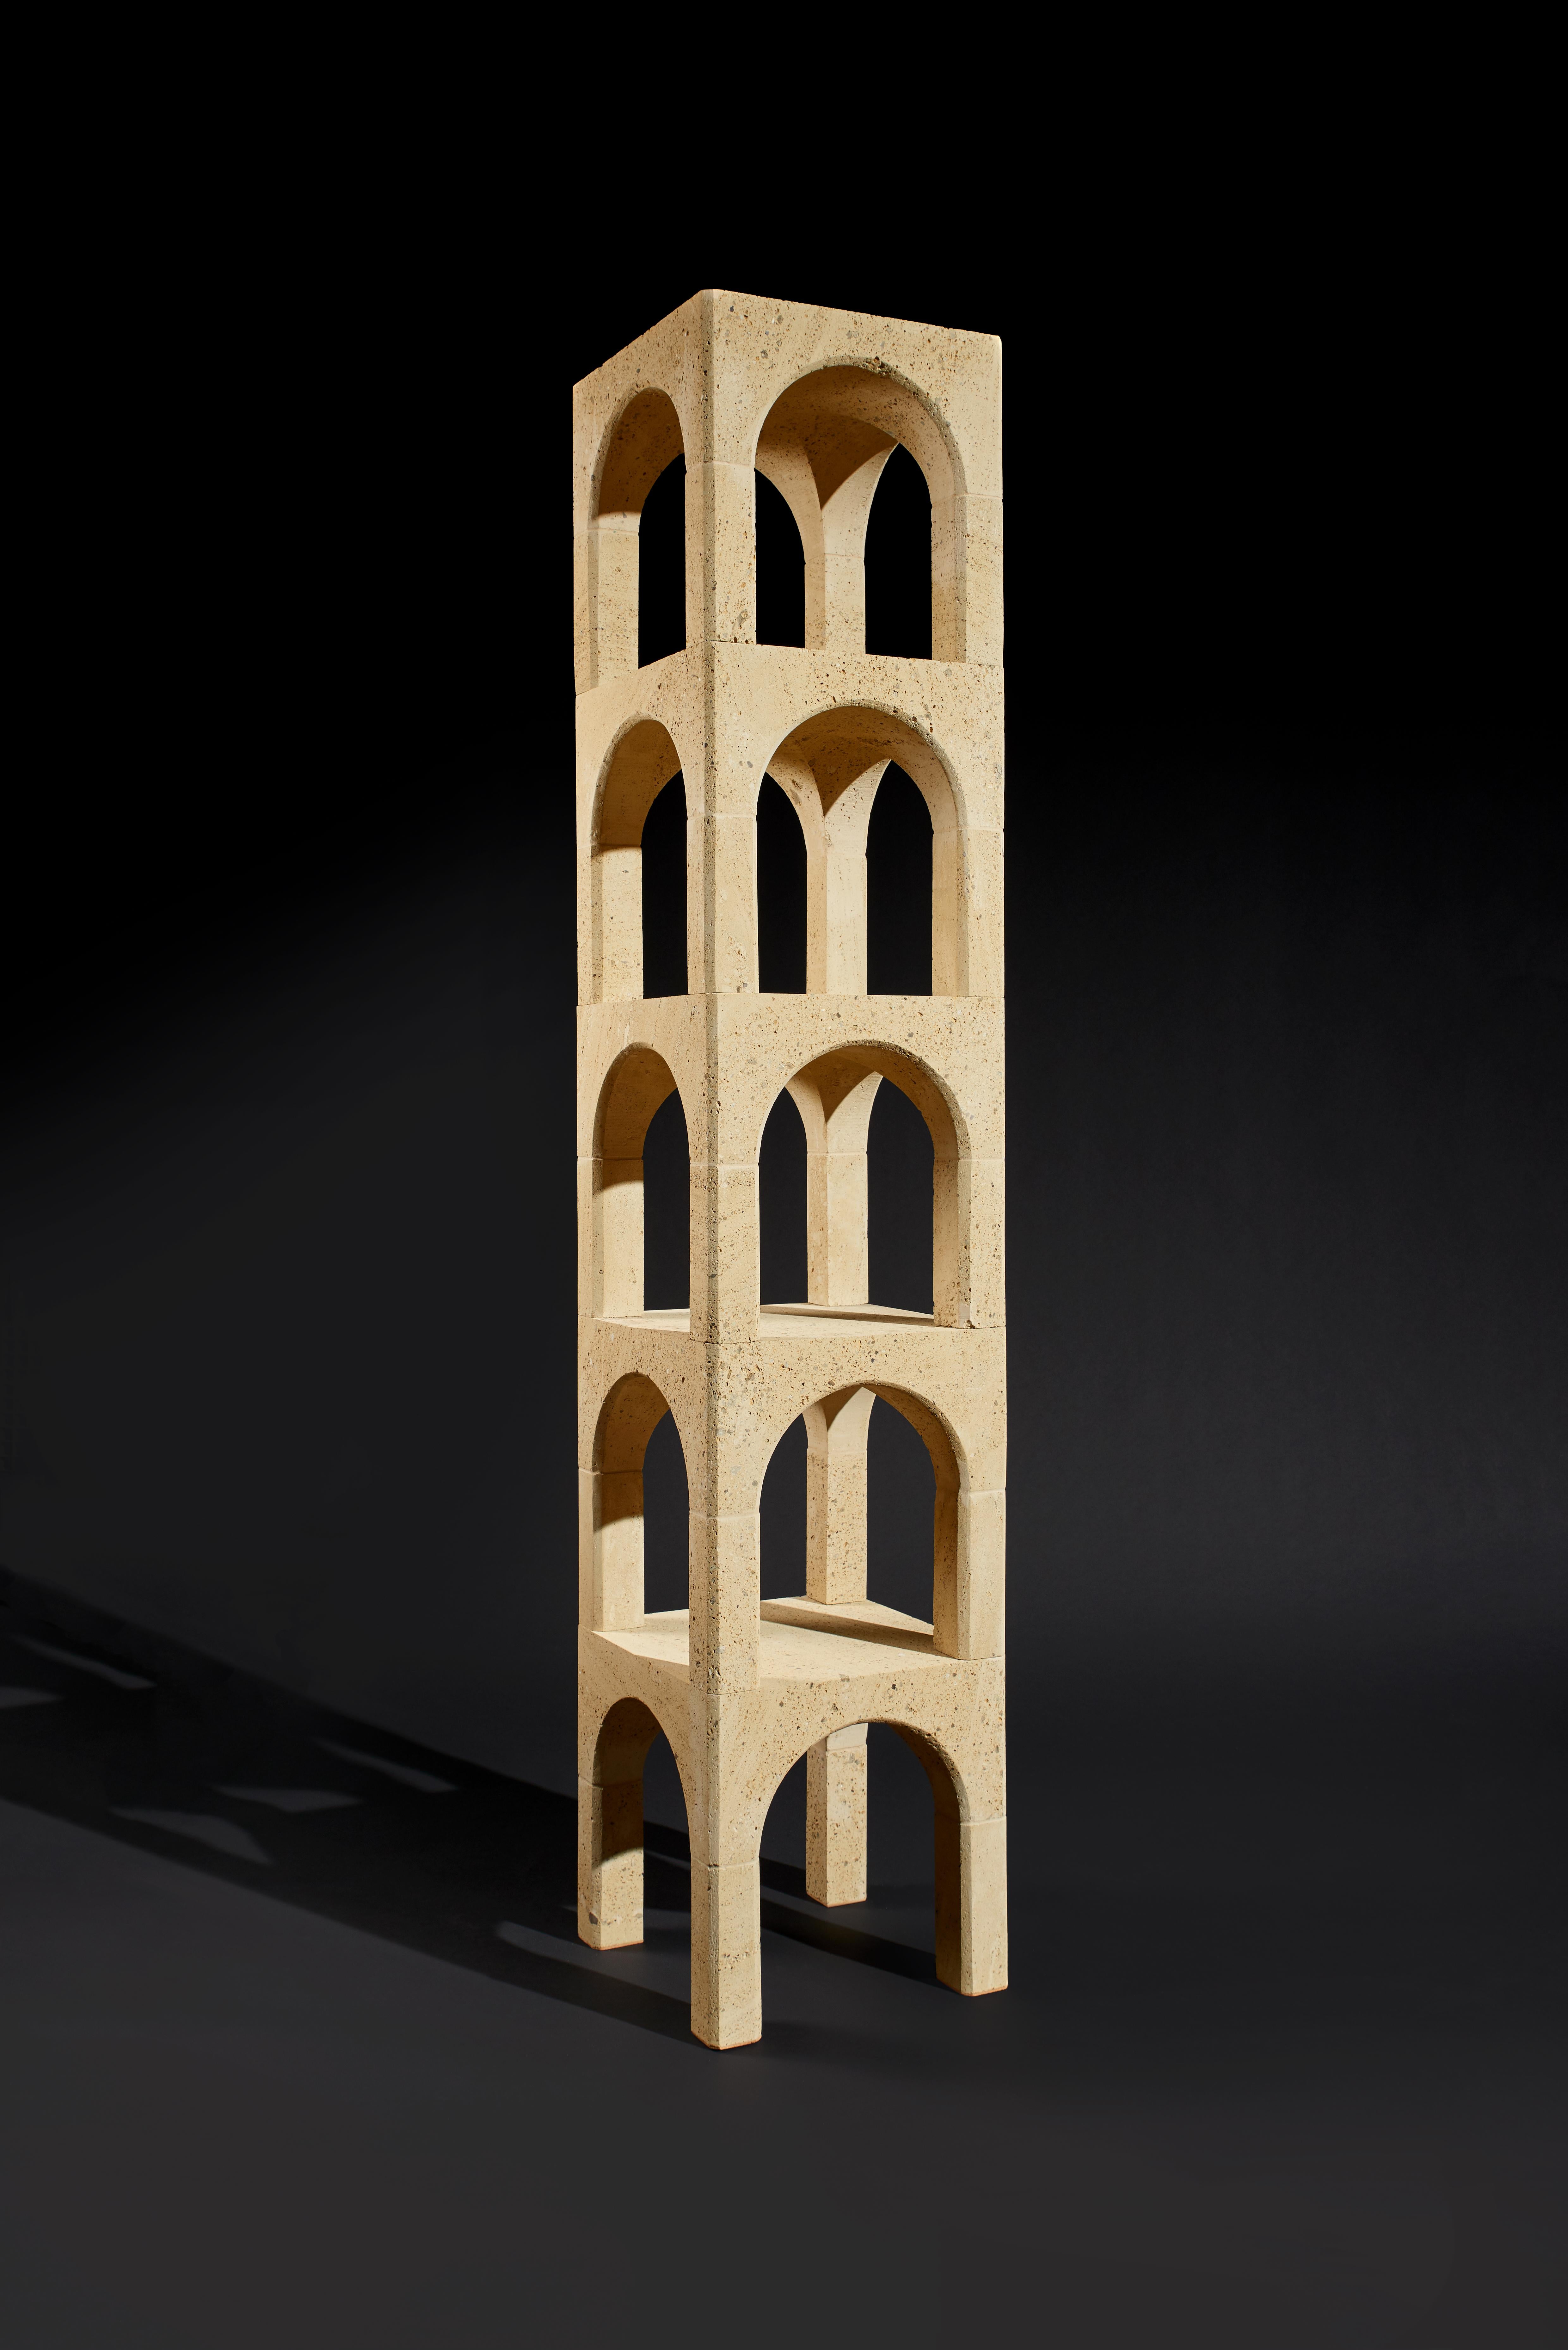 Penta shelf by Corradino Garofalo
Limited Edition of 9 + 1 a.p.
Dimensions: D 42 x W 42 x H 210 cm
Material: Stone.

Partenopea is a collection of six objects that materialise the profound connection between an ignimbrite rock and a city